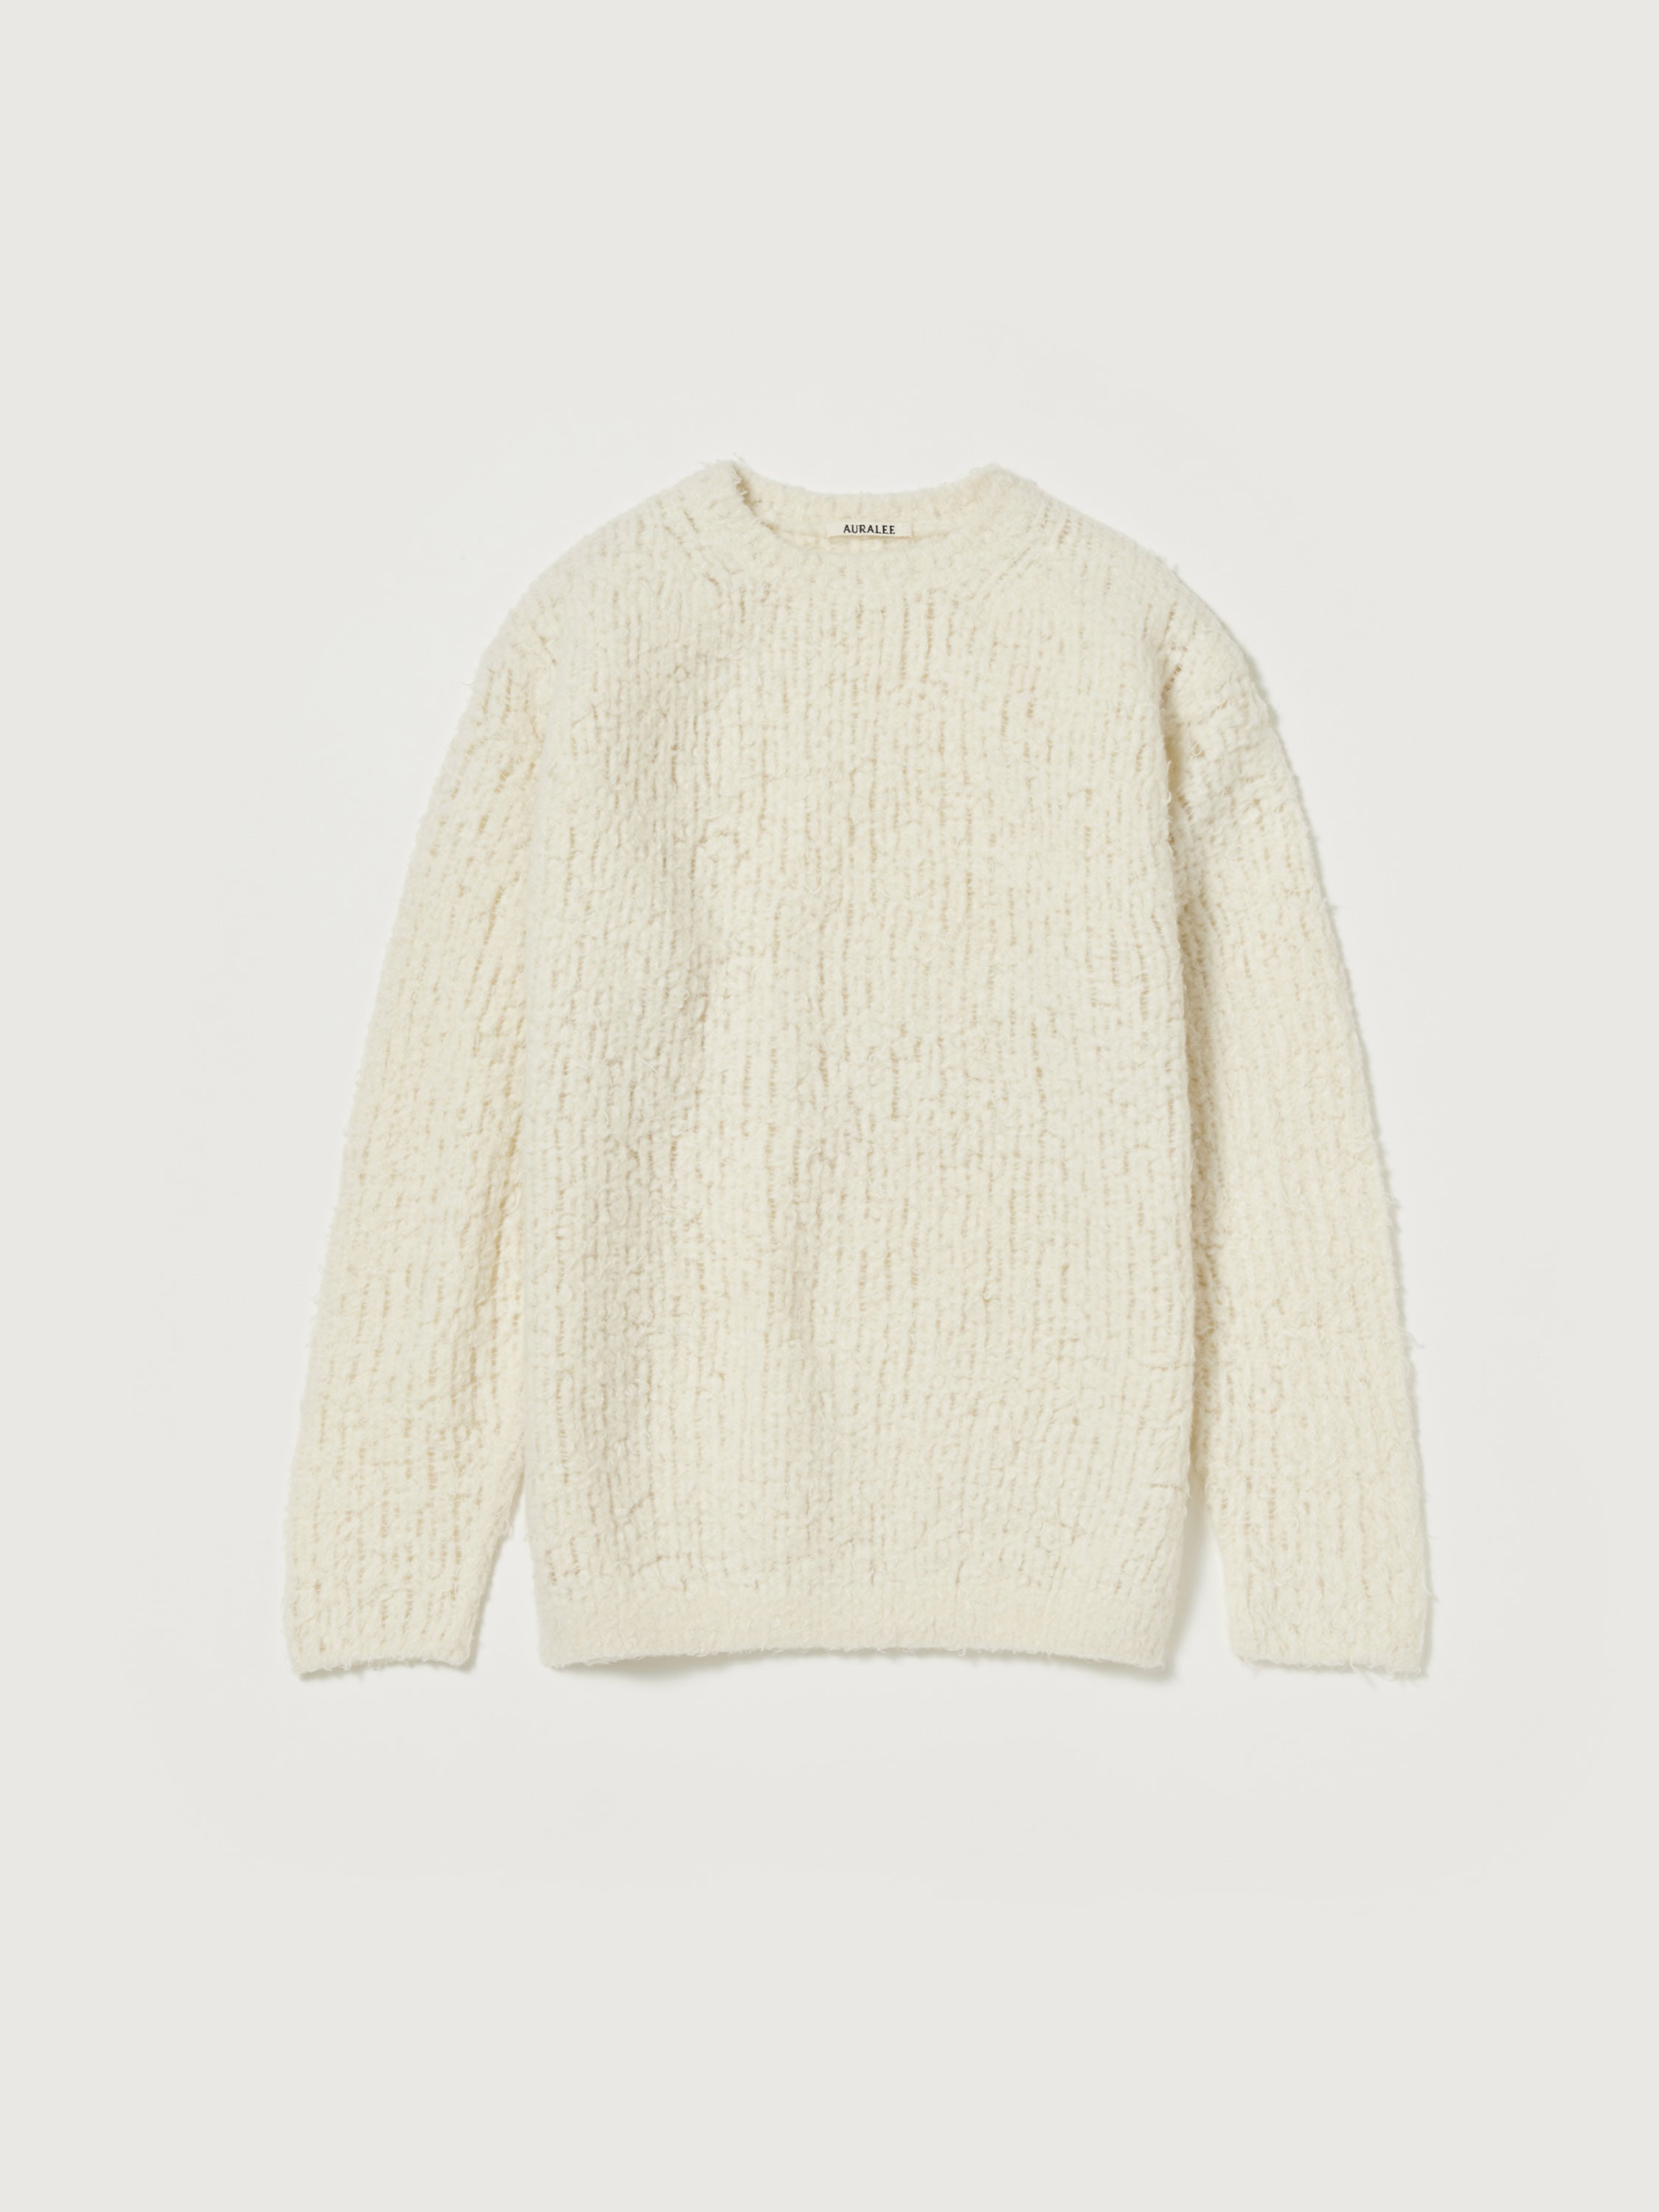 MILLED WOOL MOAL KNIT BIG P/O 詳細画像 WHITE 5